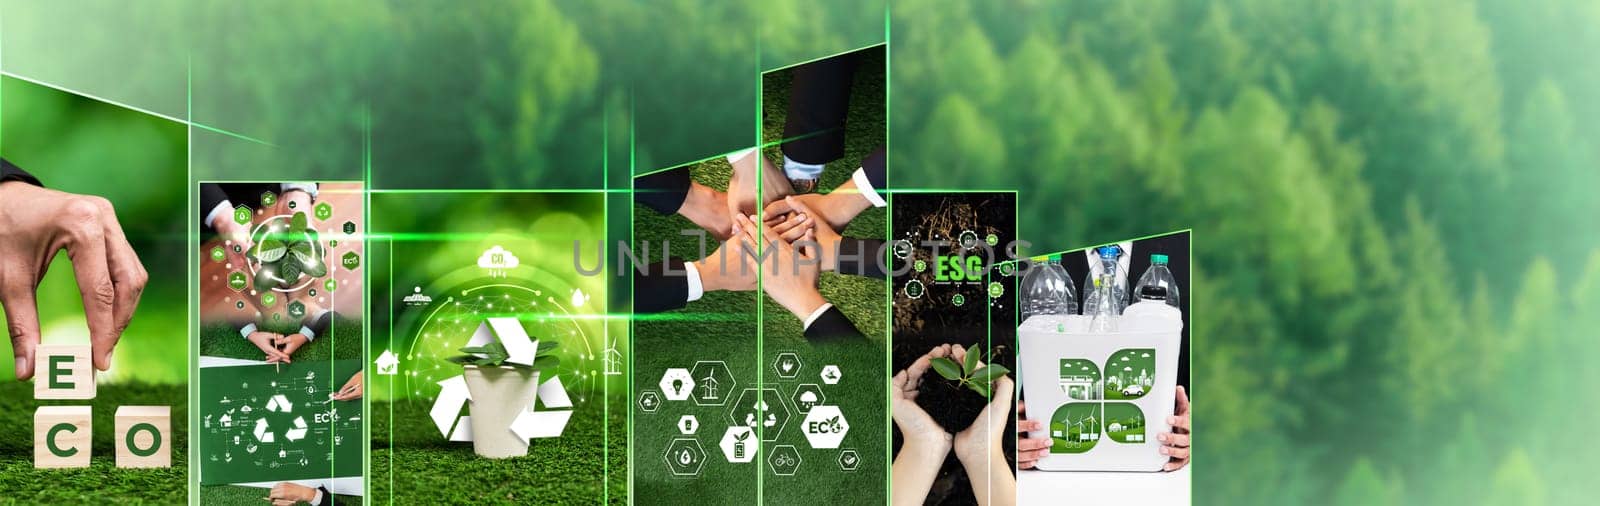 Green business ESG management tool to save world LCA future for better day . by biancoblue